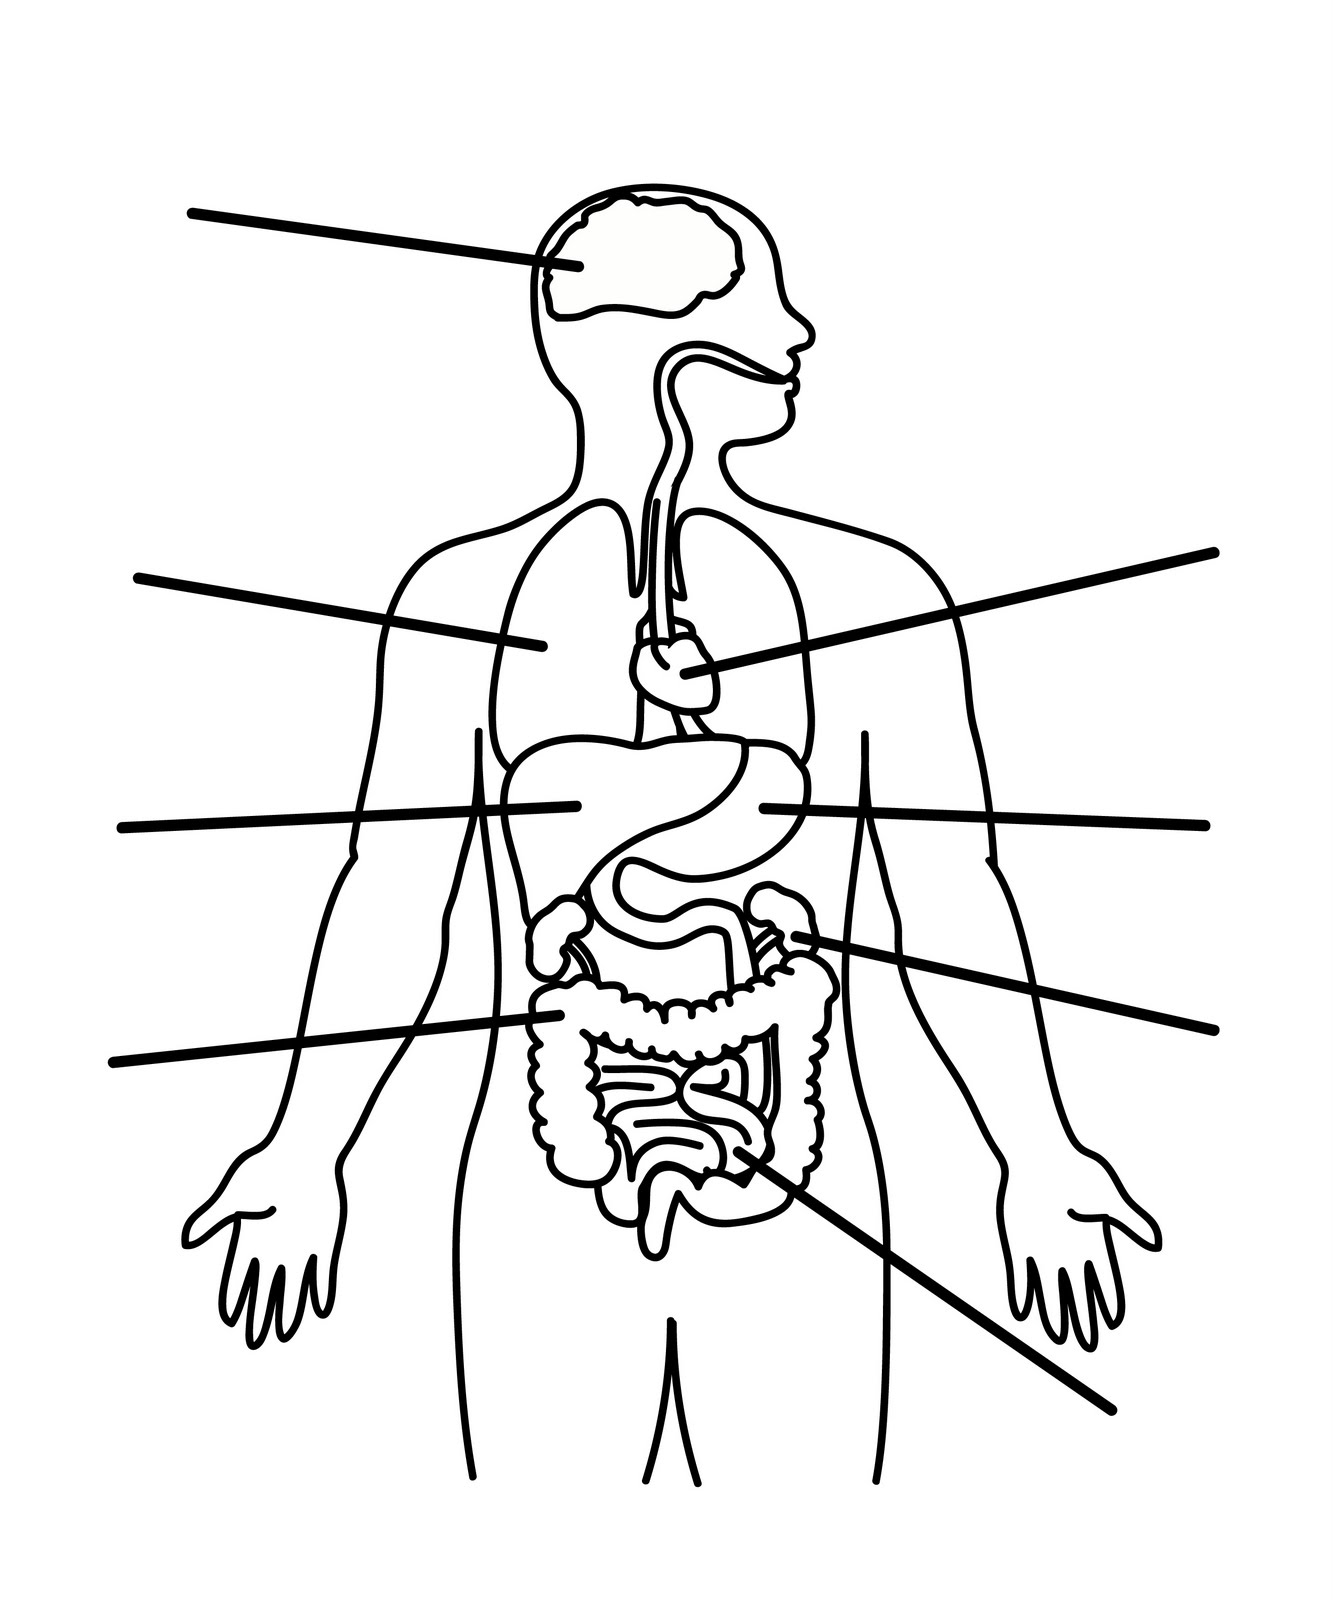 Outline Of The Human Body Front And Back - ClipArt Best